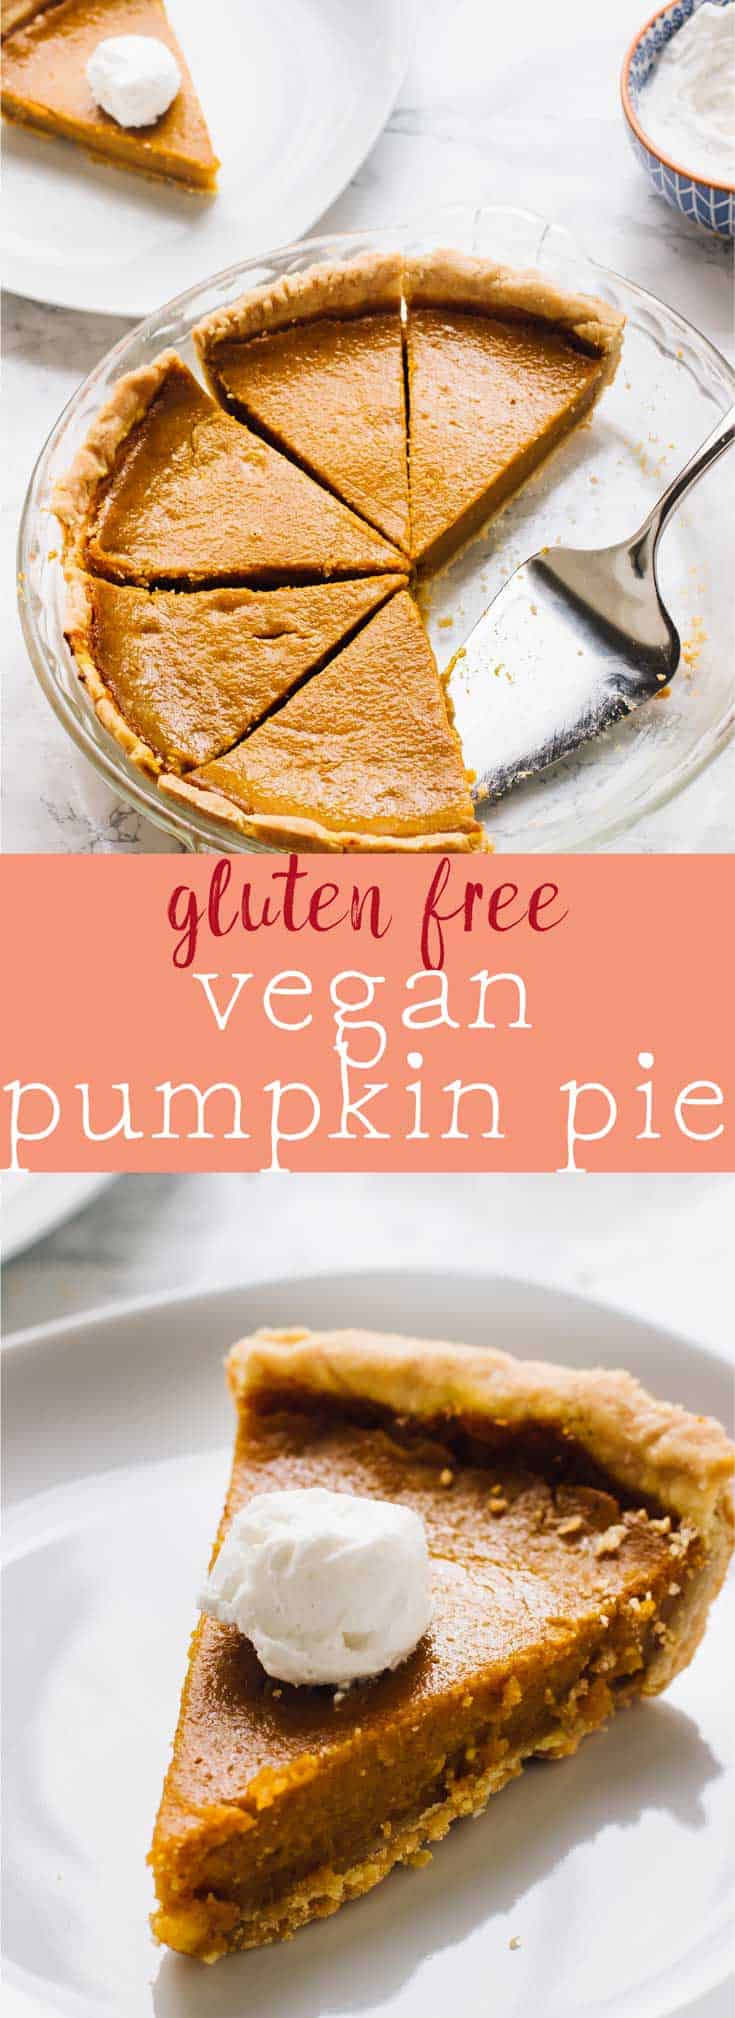 This Vegan Pumpkin Pie is made with coconut milk, homemade pumpkin puree and all natural healthy ingredients! It's refined-sugar free, gluten free and bakes JUST like classic pumpkin pie!